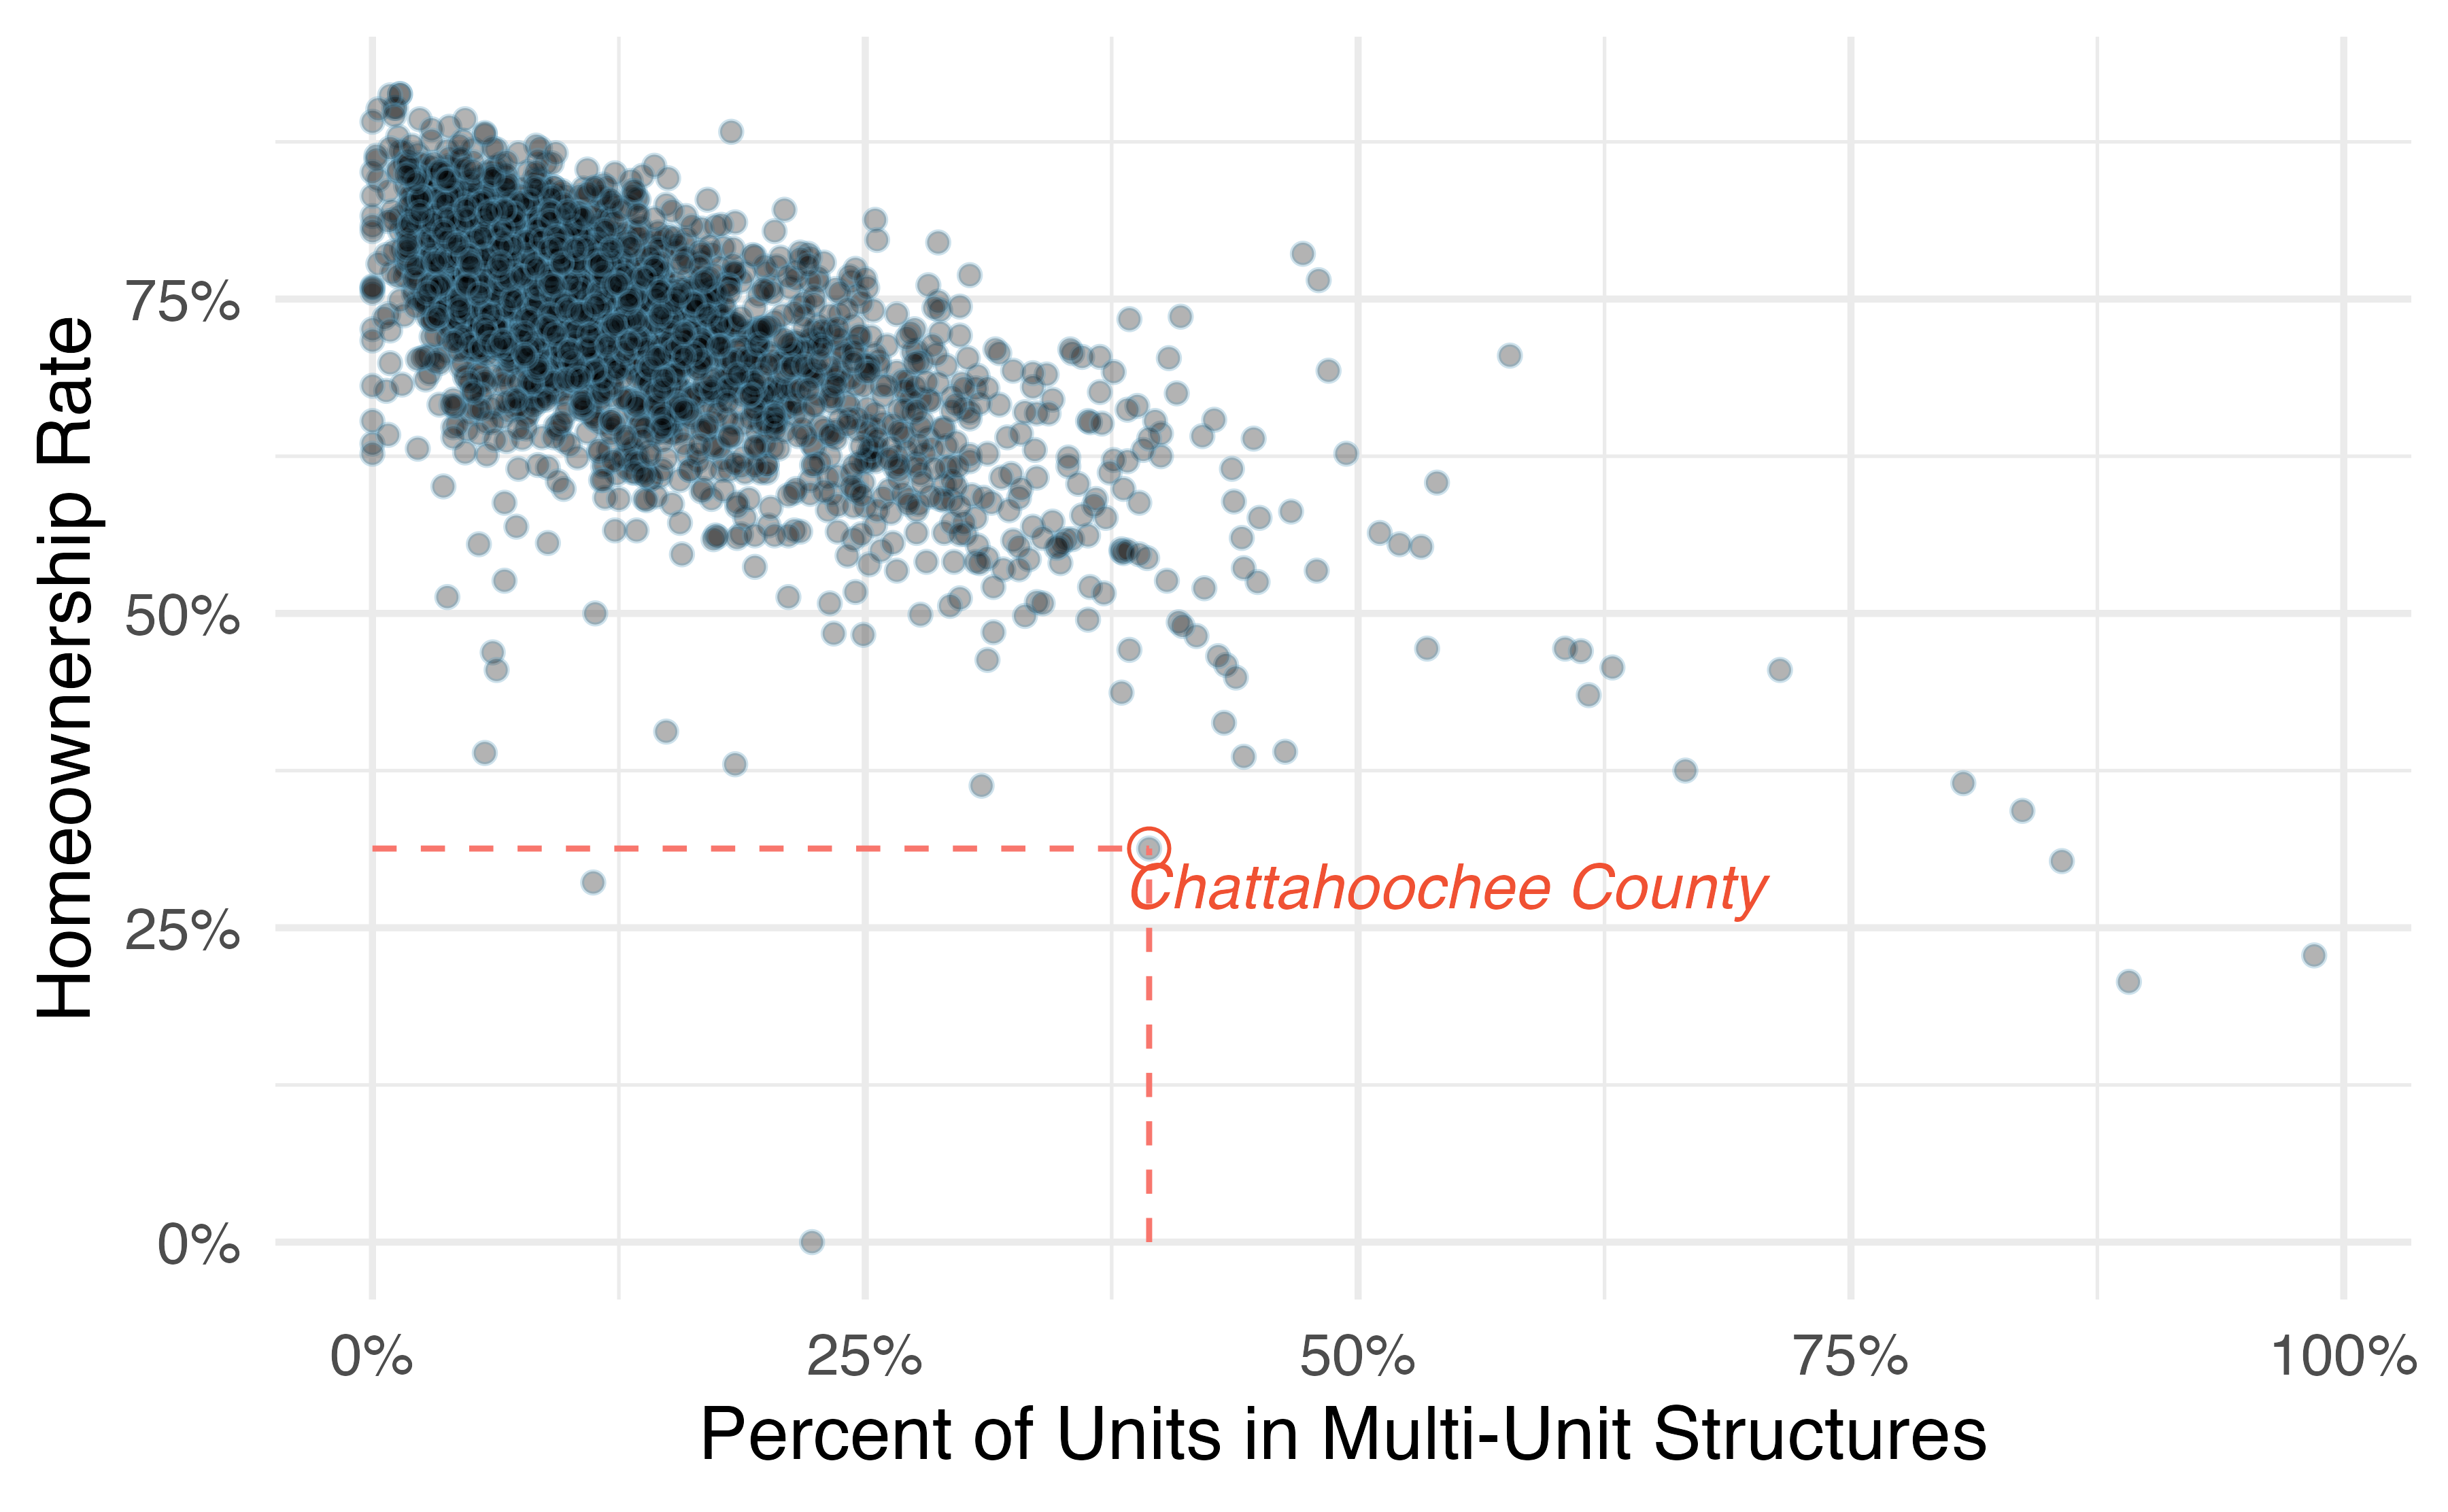 A scatterplot of homeownership versus the percent of units that are in multi-unit structures for US counties. The highlighted dot represents Chattahoochee County, Georgia, which has a multi-unit rate of 39.4% and a homeownership rate of 31.3%.